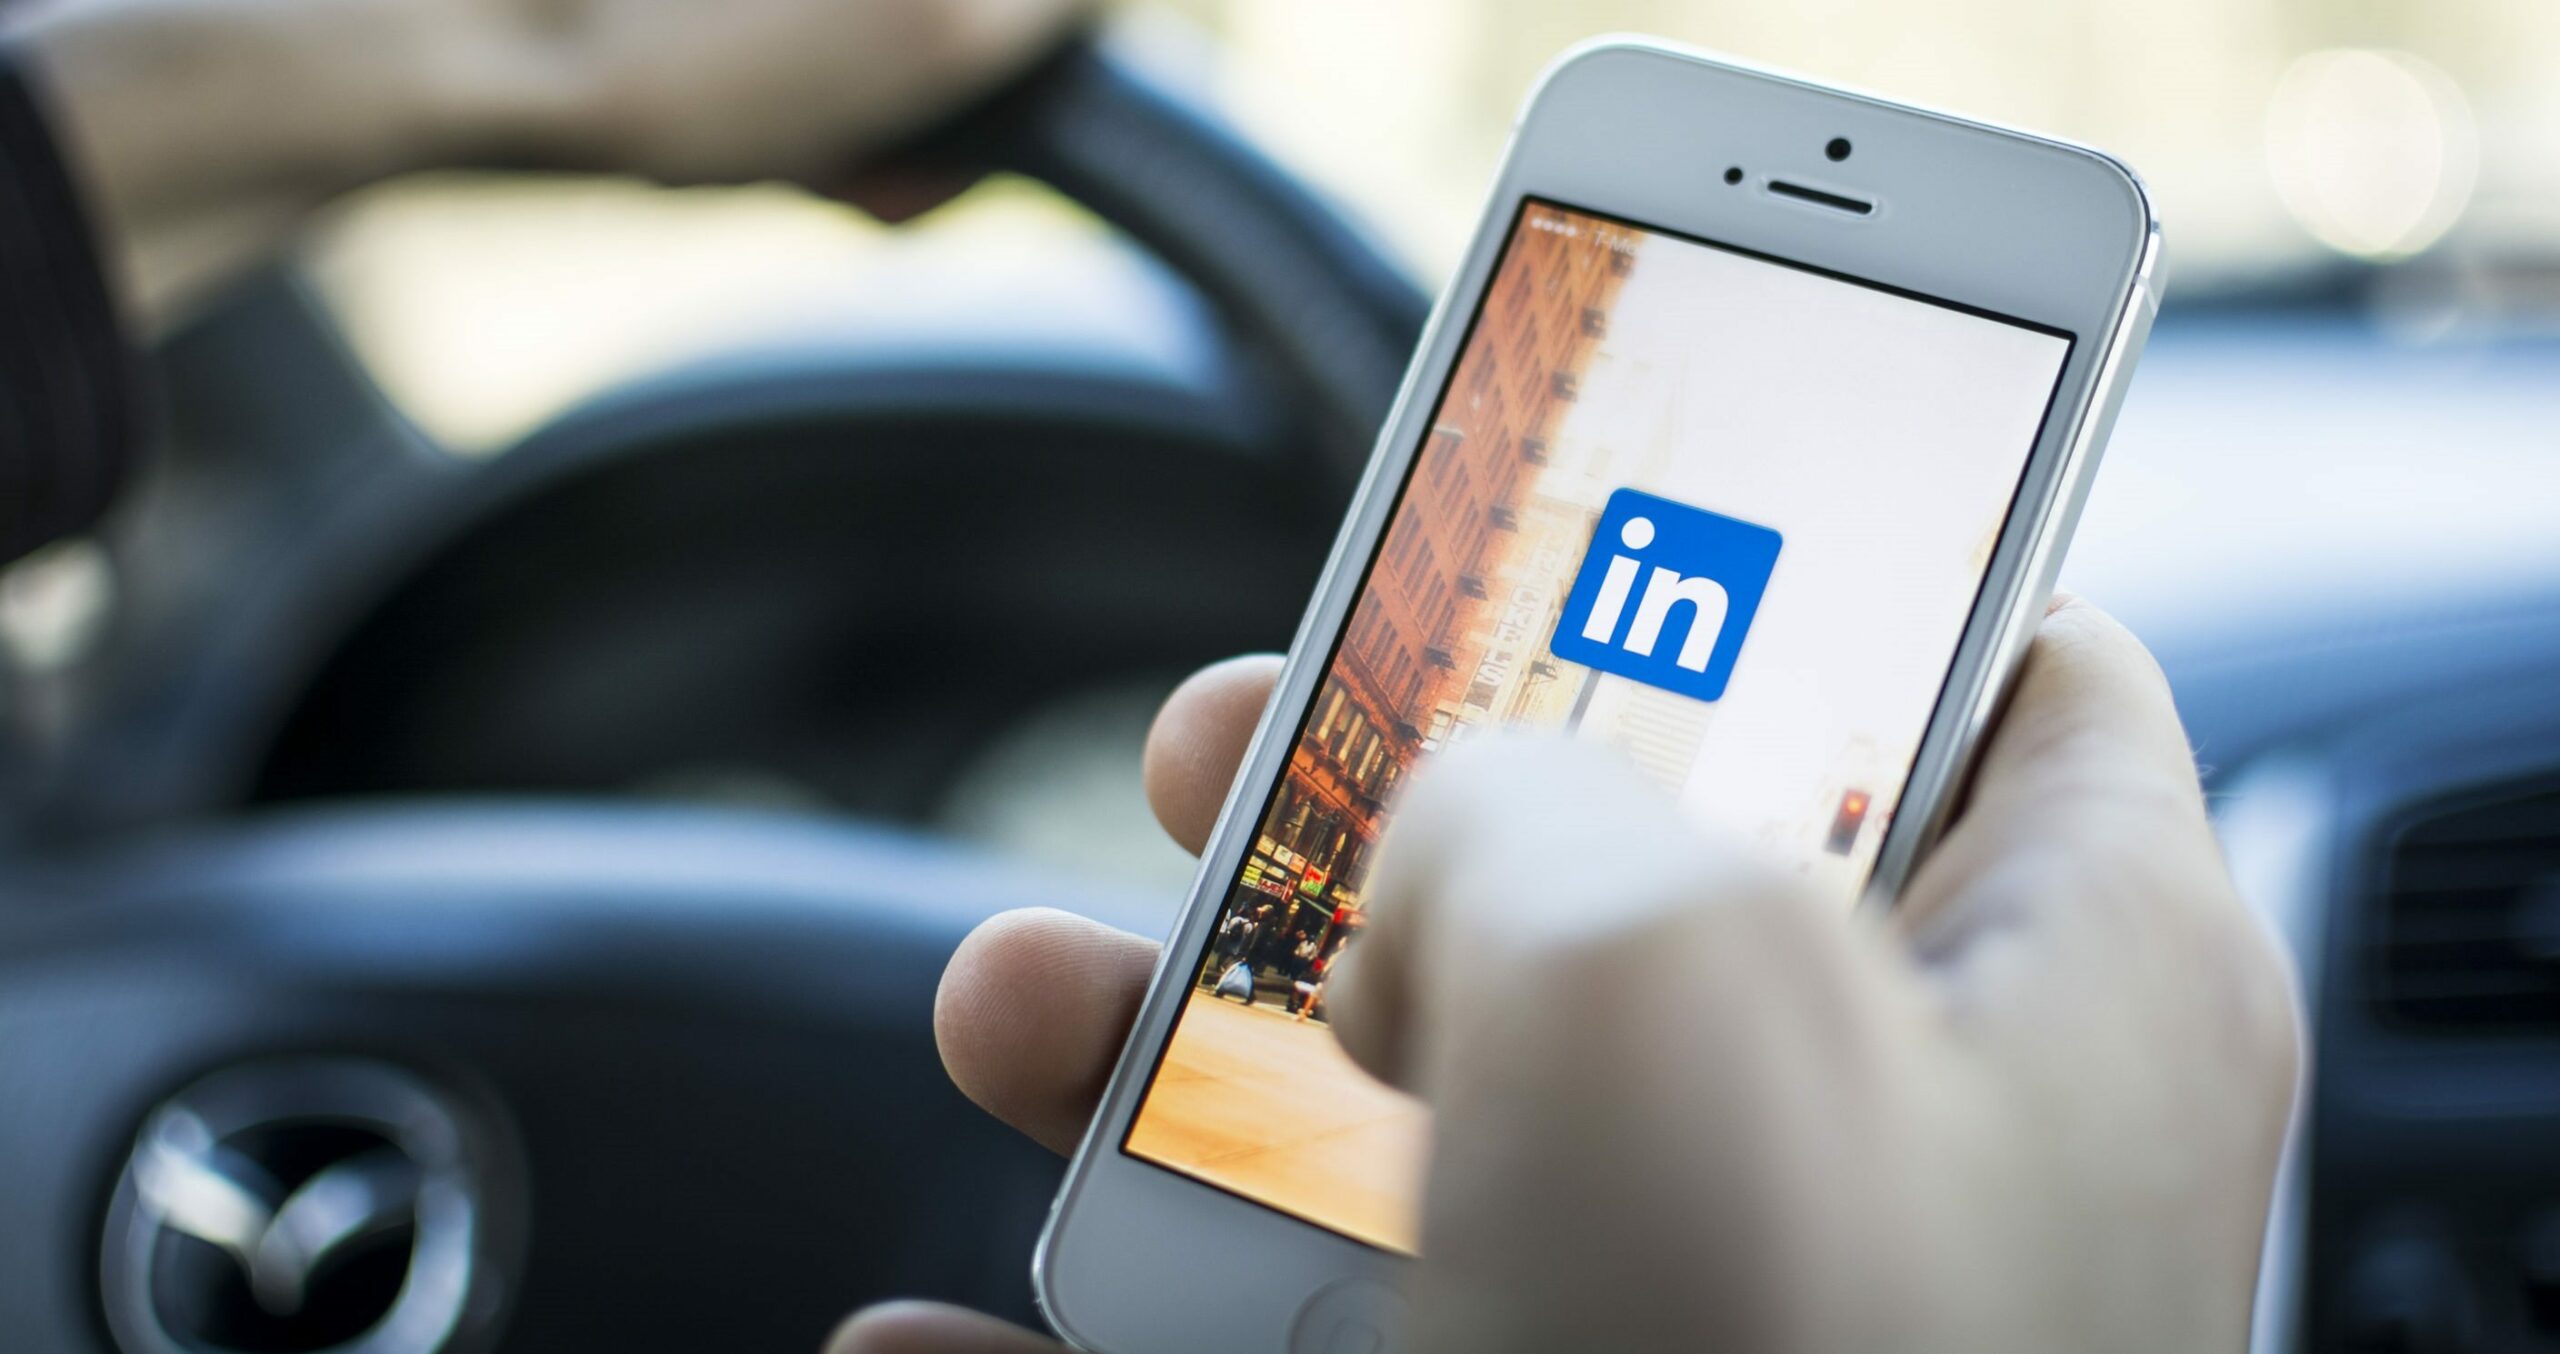 LinkedIn Leader Shares How to Build a High-Performance Content Marketing Team